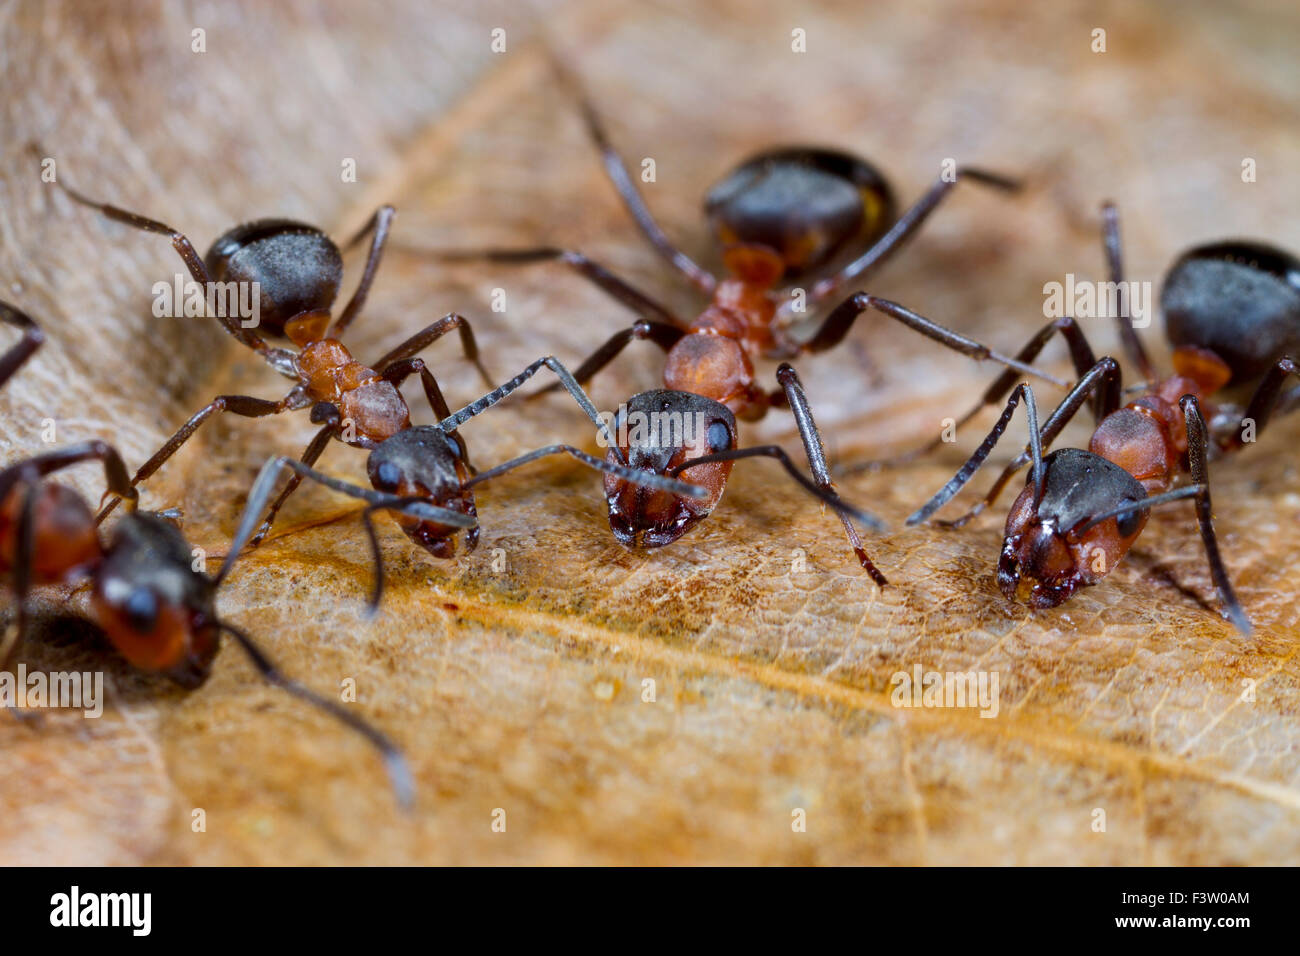 Red Wood Ants (Formica rufa) adult workers drinking from sugar water bait. Shropshire, England. April. Stock Photo